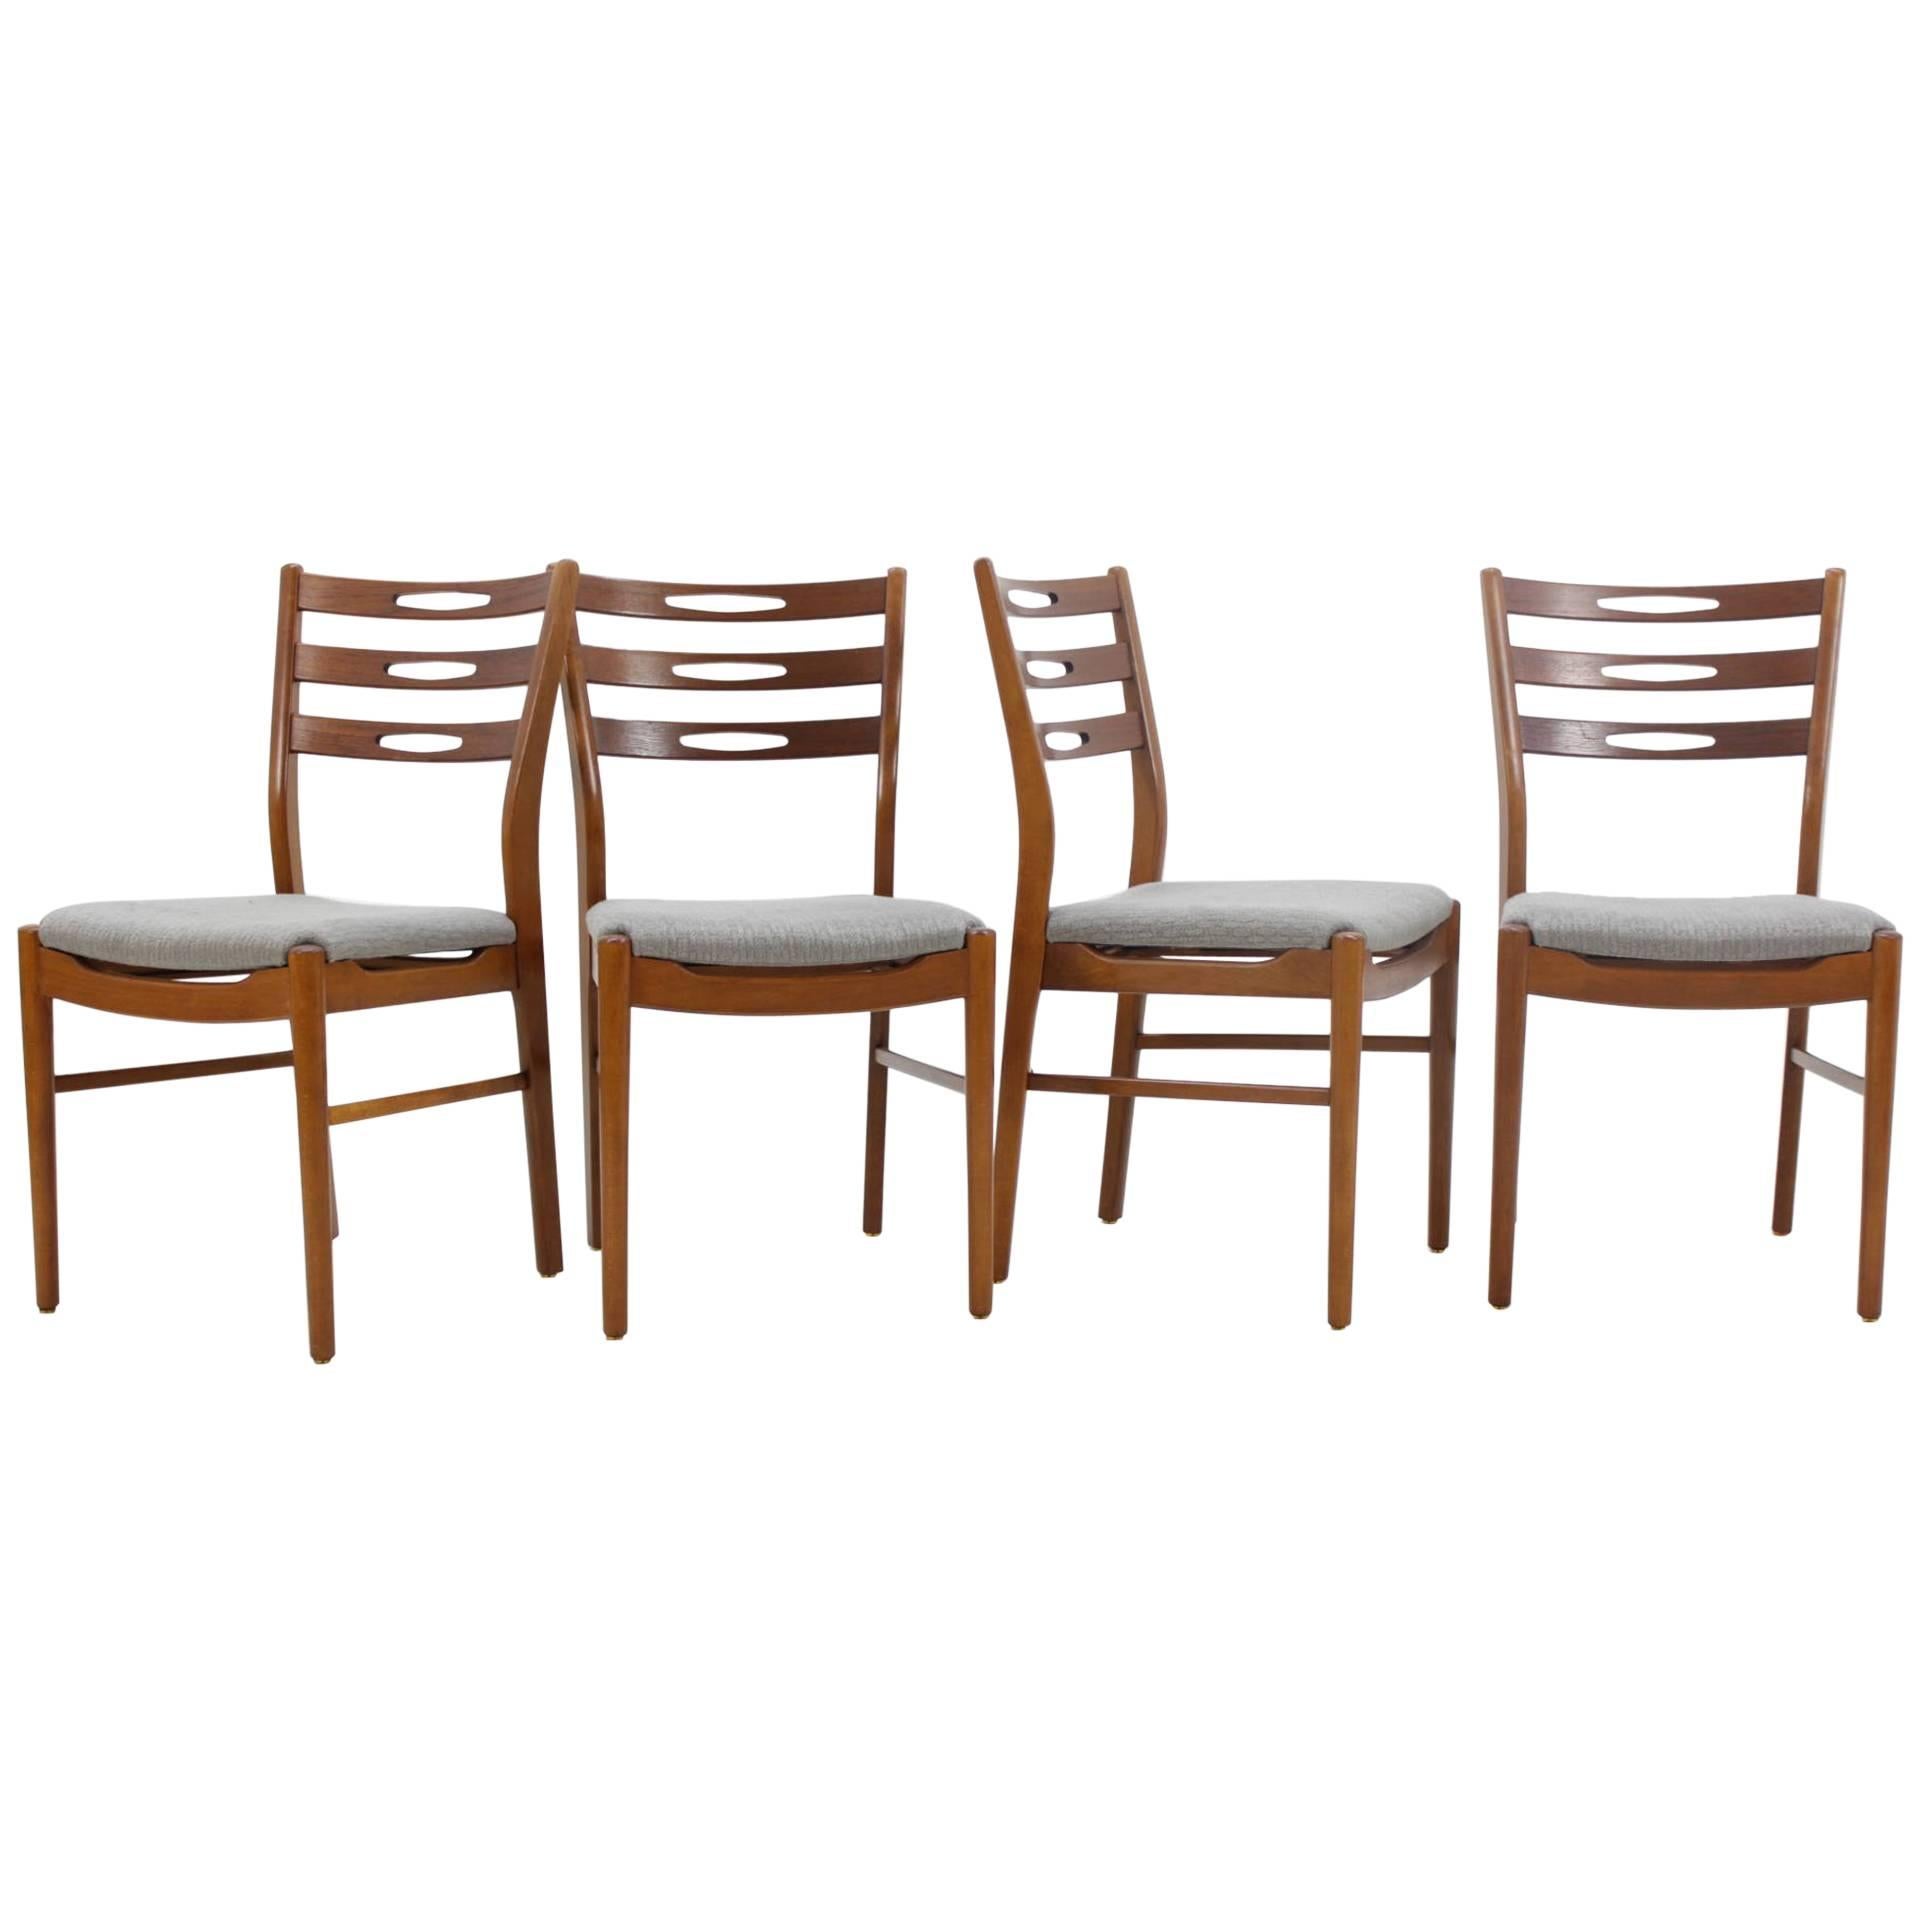 1960s Set of Four Danish Teak Chairs For Sale